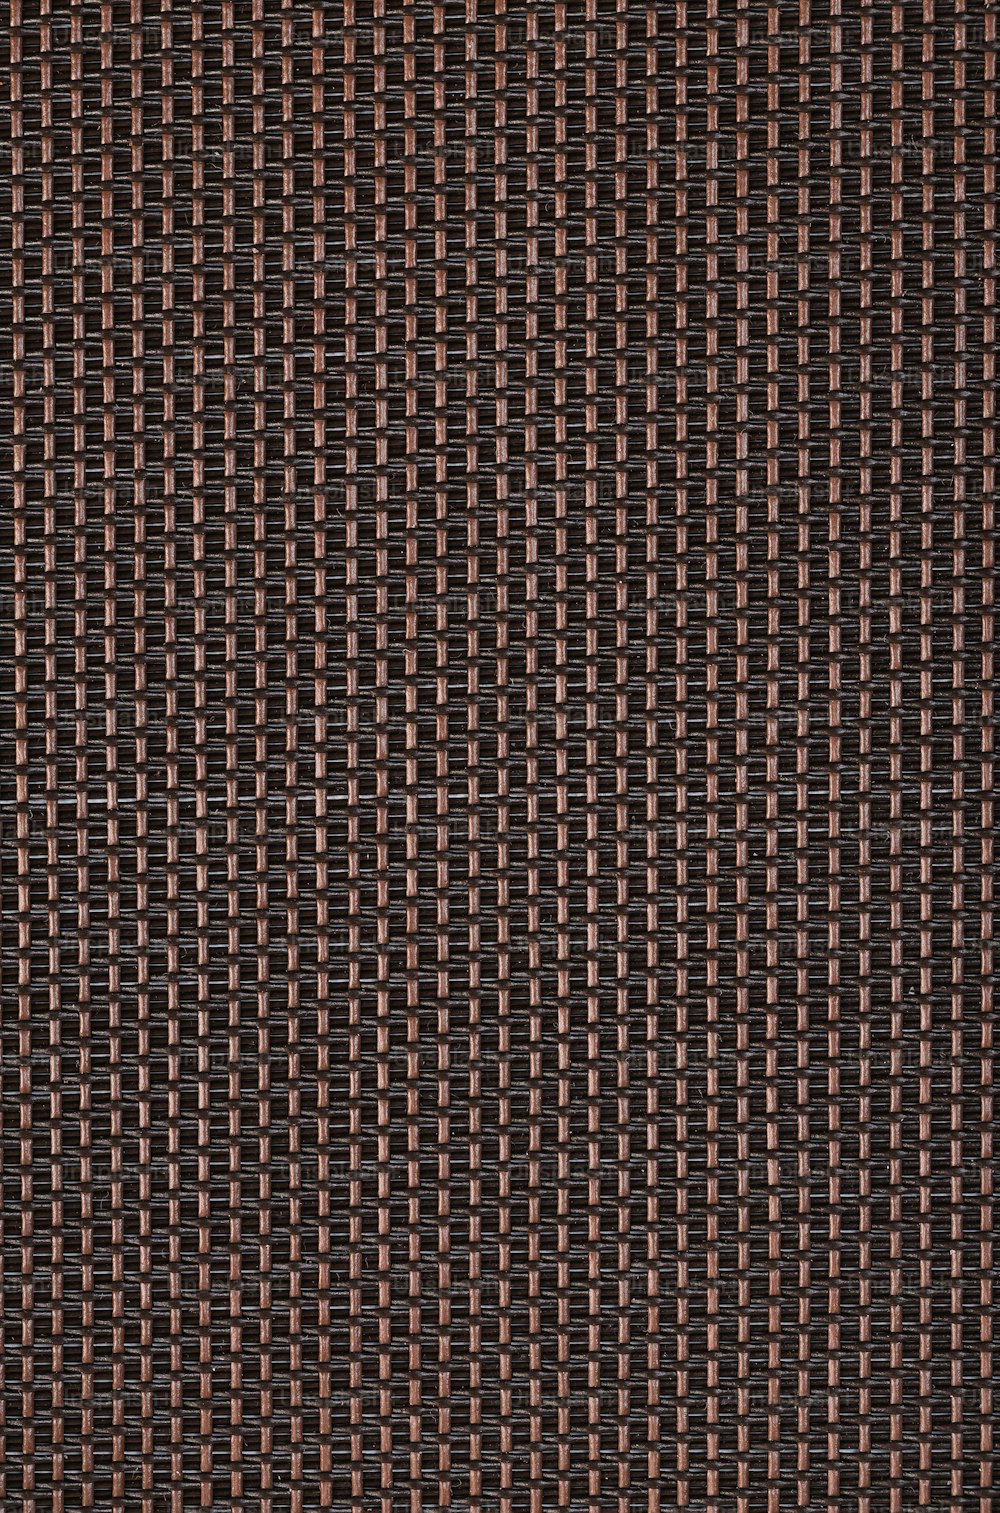 a close up of a brown woven material